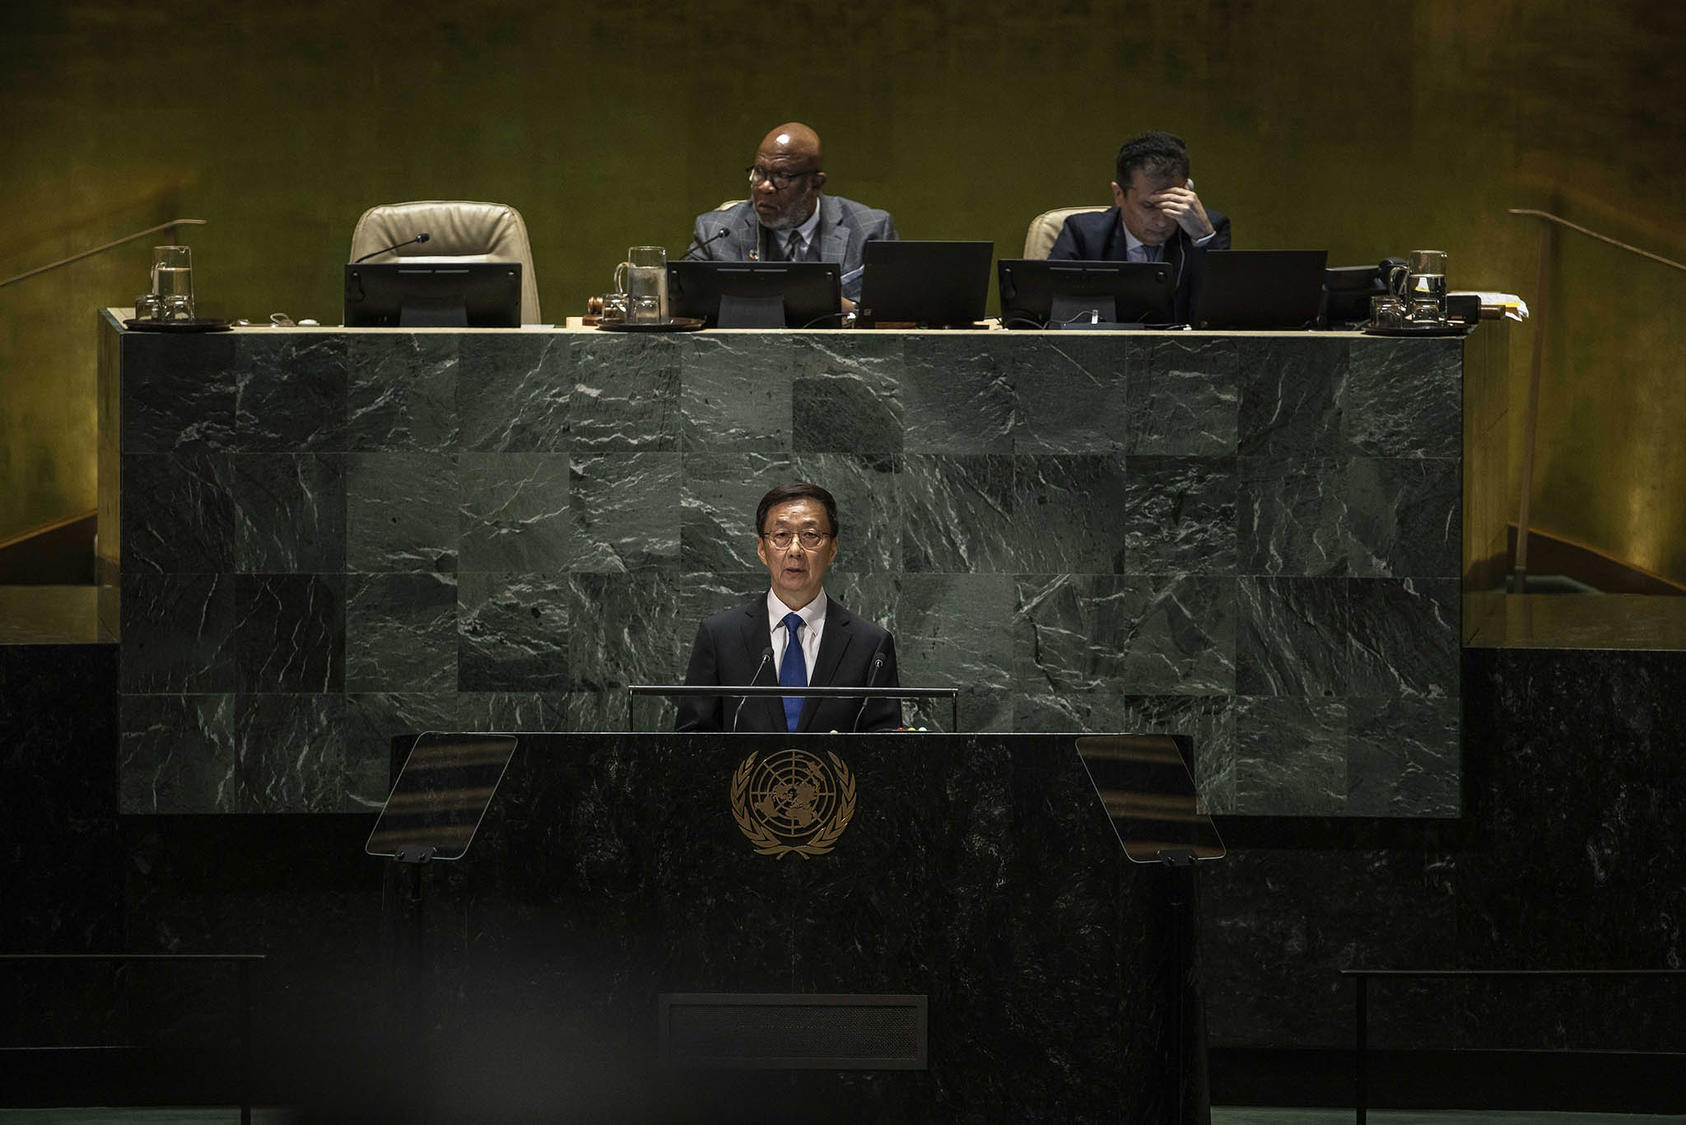 Vice President of China Han Zheng addresses the 78th session of the United Nations General Assembly at U.N. headquarters in New York on Thursday, Sept. 21, 2023. (Dave Sanders/The New York Times)